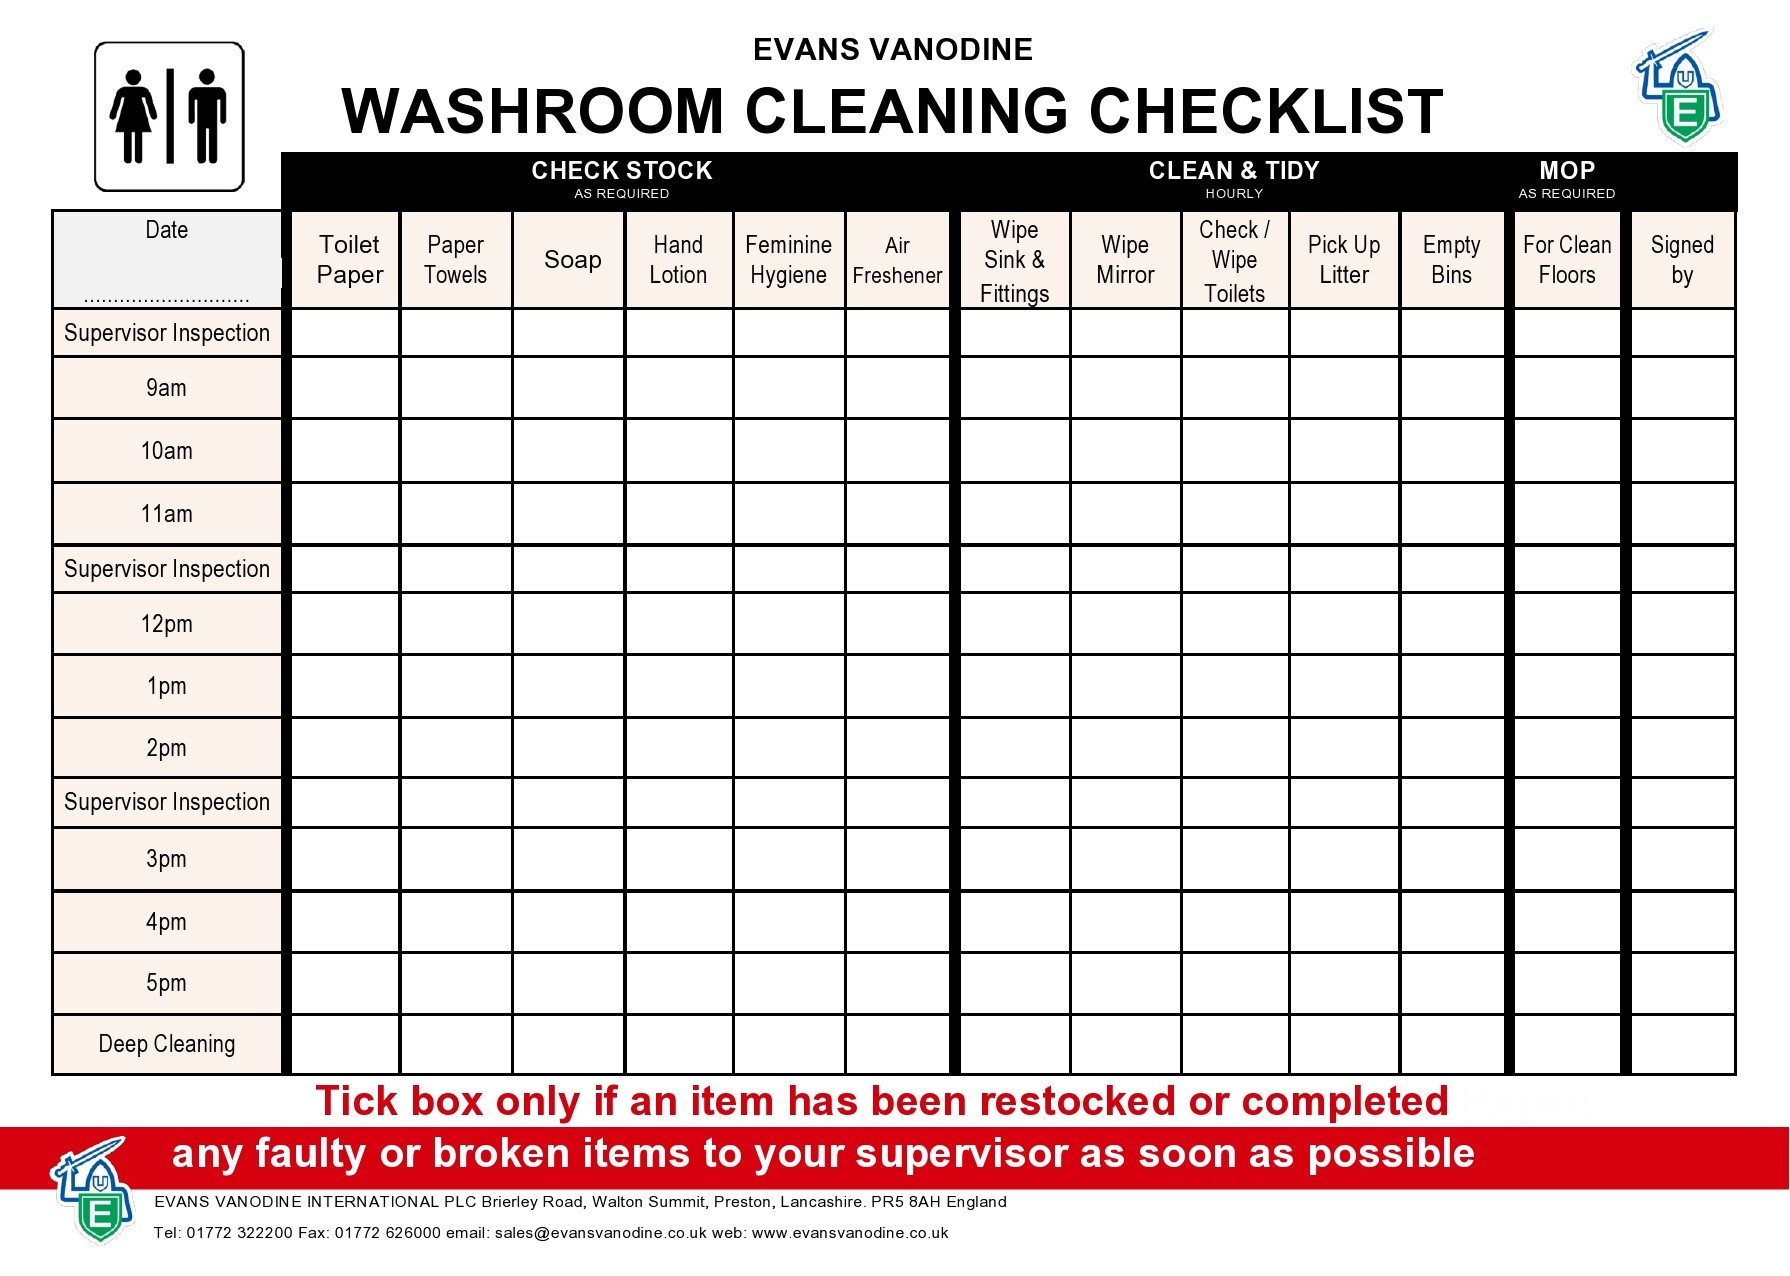 10 Printable Bathroom Cleaning Checklists [Word] ᐅ TemplateLab With Public Restroom Cleaning Checklist Template Throughout Public Restroom Cleaning Checklist Template